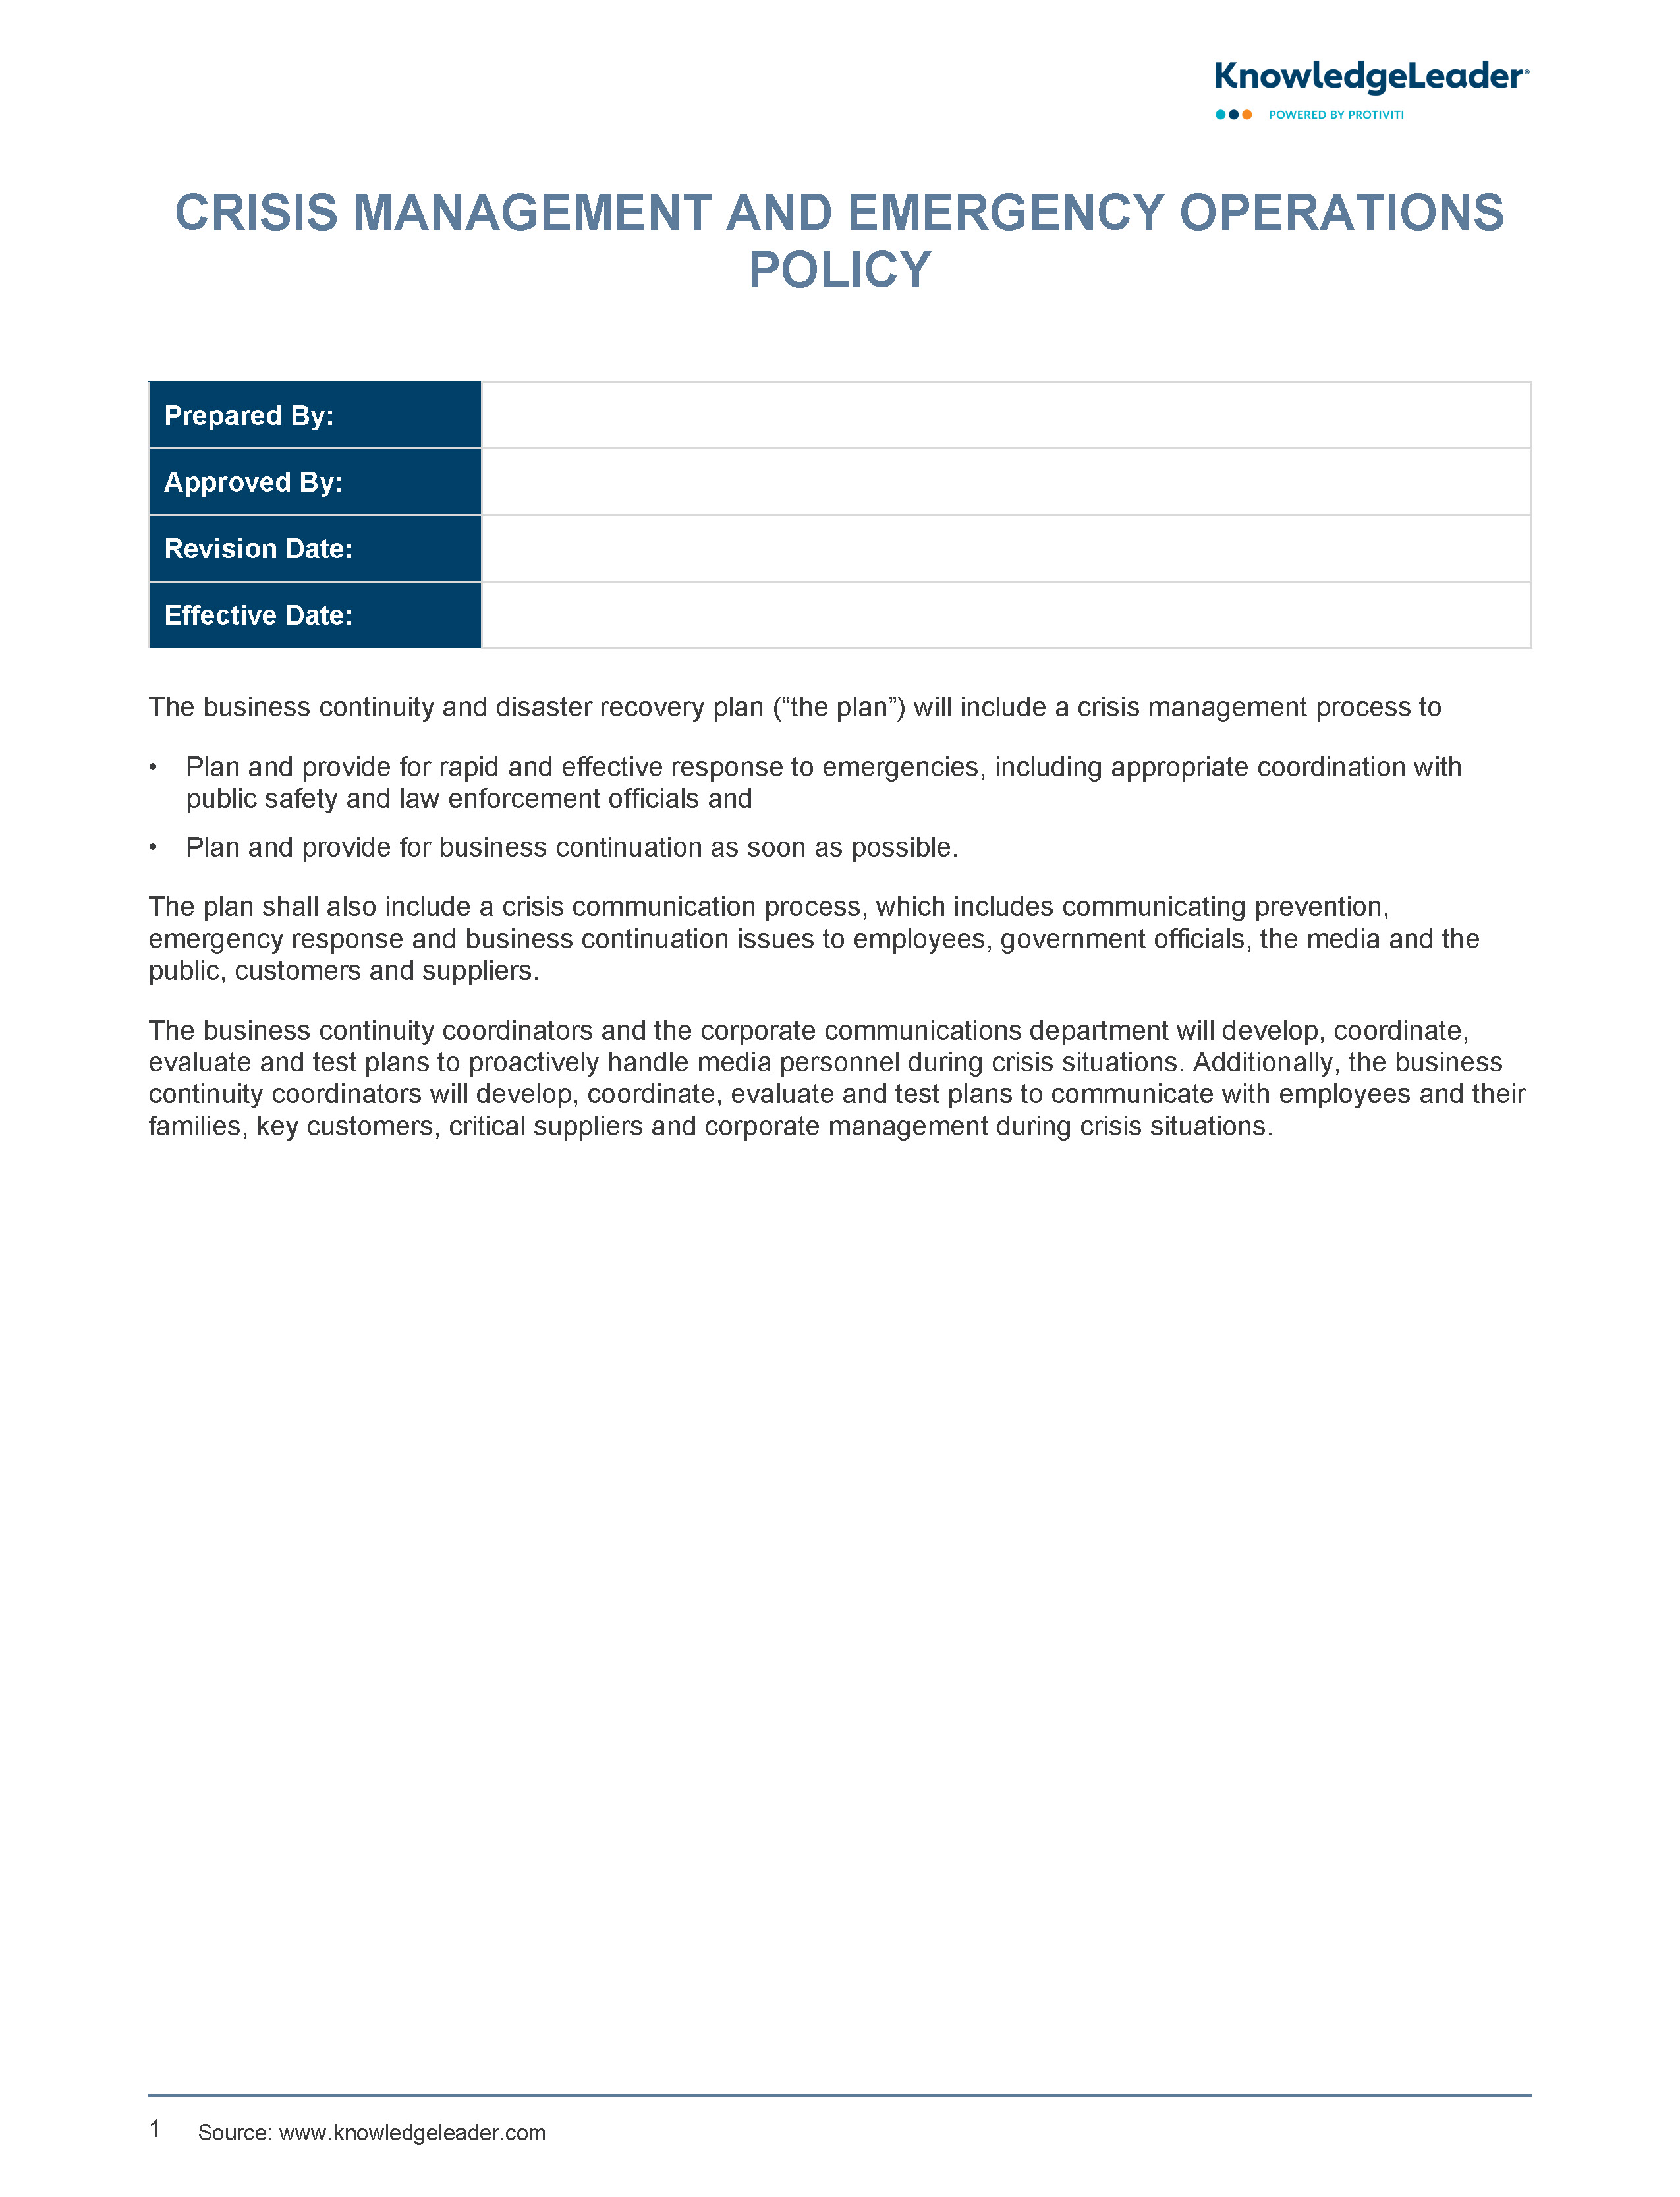 Screenshot of the first page of Crisis Management and Emergency Operations Policy